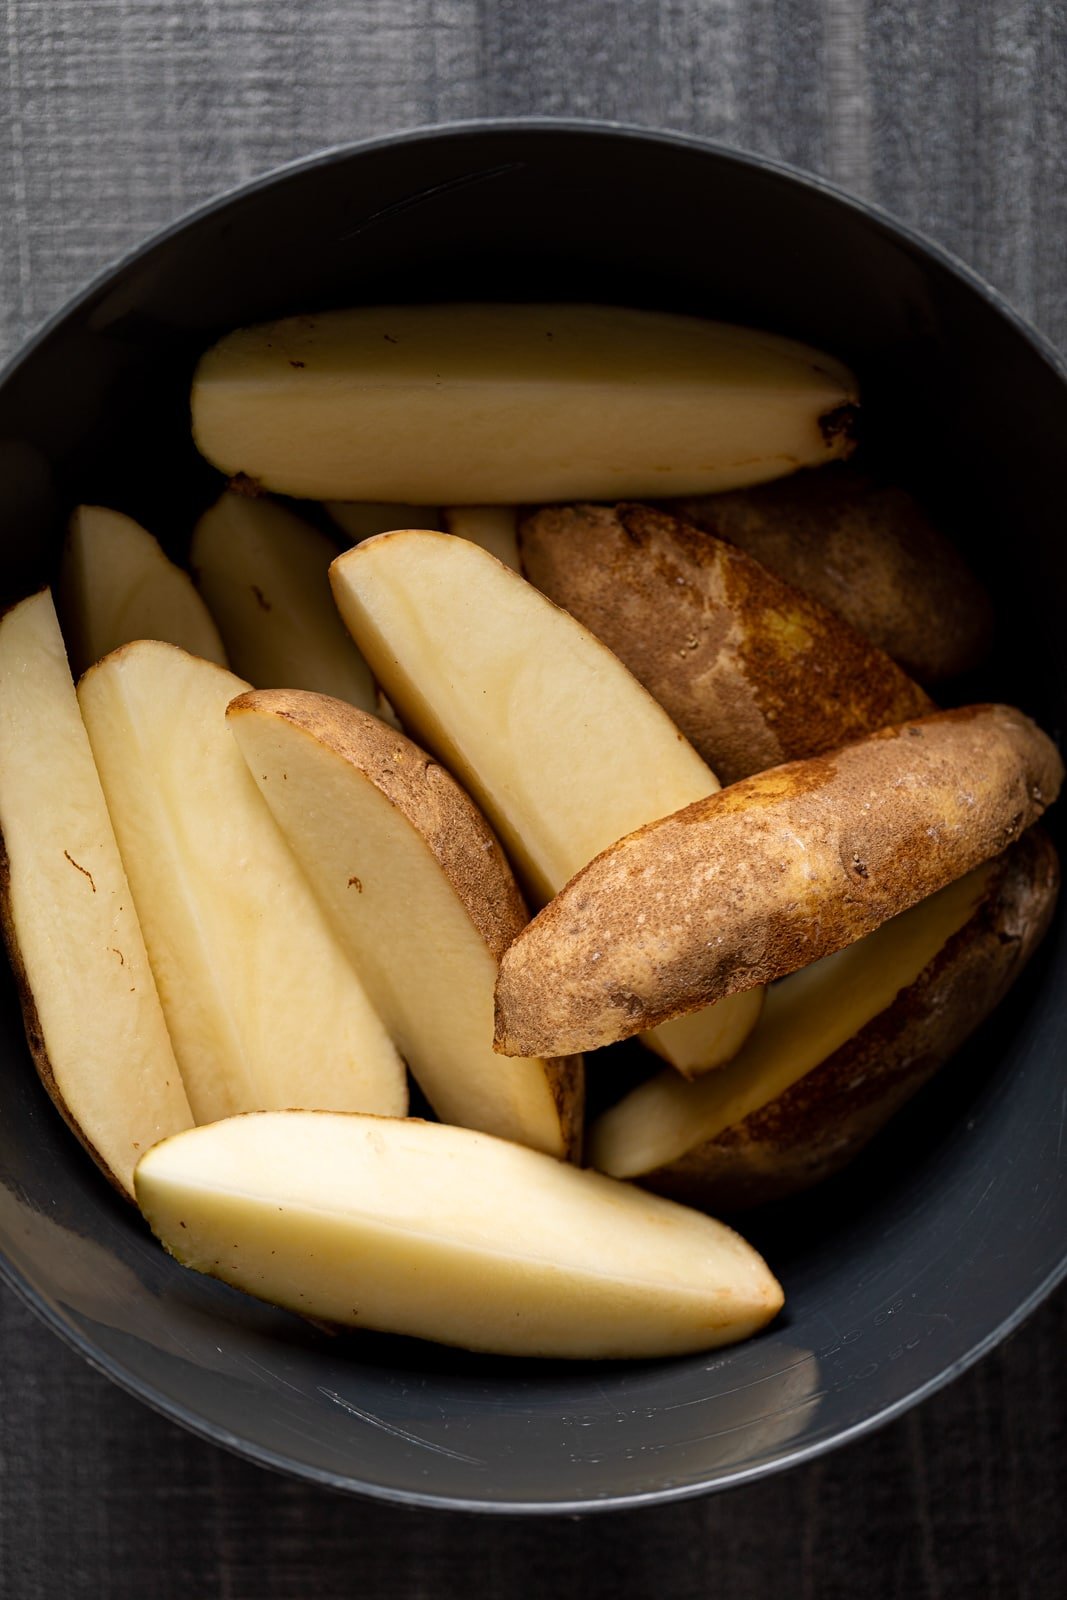 Potato wedges in a pan